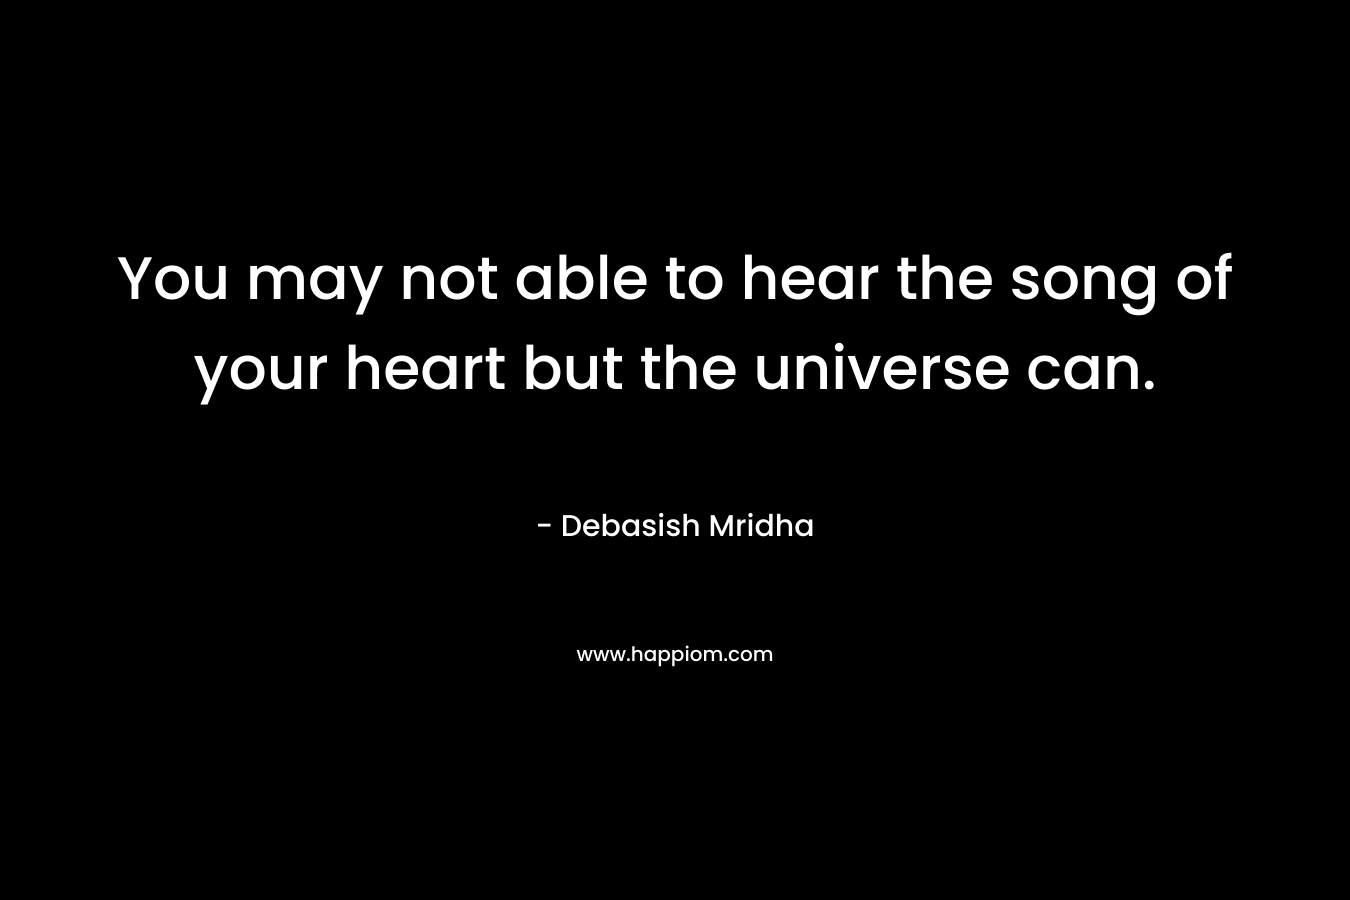 You may not able to hear the song of your heart but the universe can.